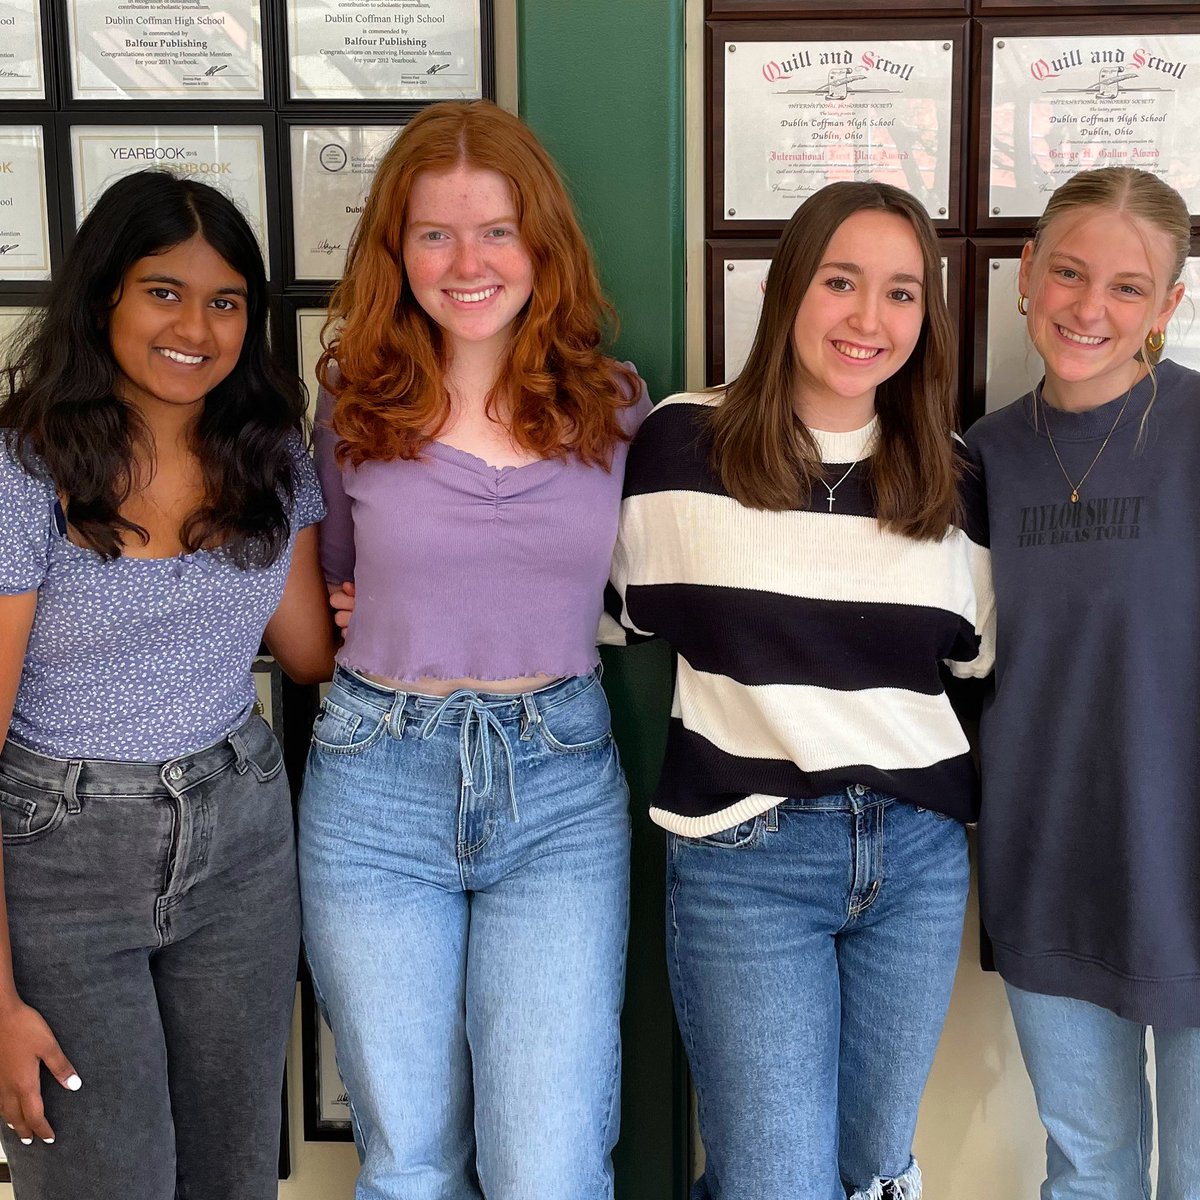 Congratulations to our scholastic journalists Kate Braskett, Emerson Eickholt Diya Raj, and Colleen Schweninger for winning first place awards in Sports, Feature, and News Writing from the Central Ohio Society of Professional Journalists! @CentralOhioSPJ #dcsalwaysgrowing